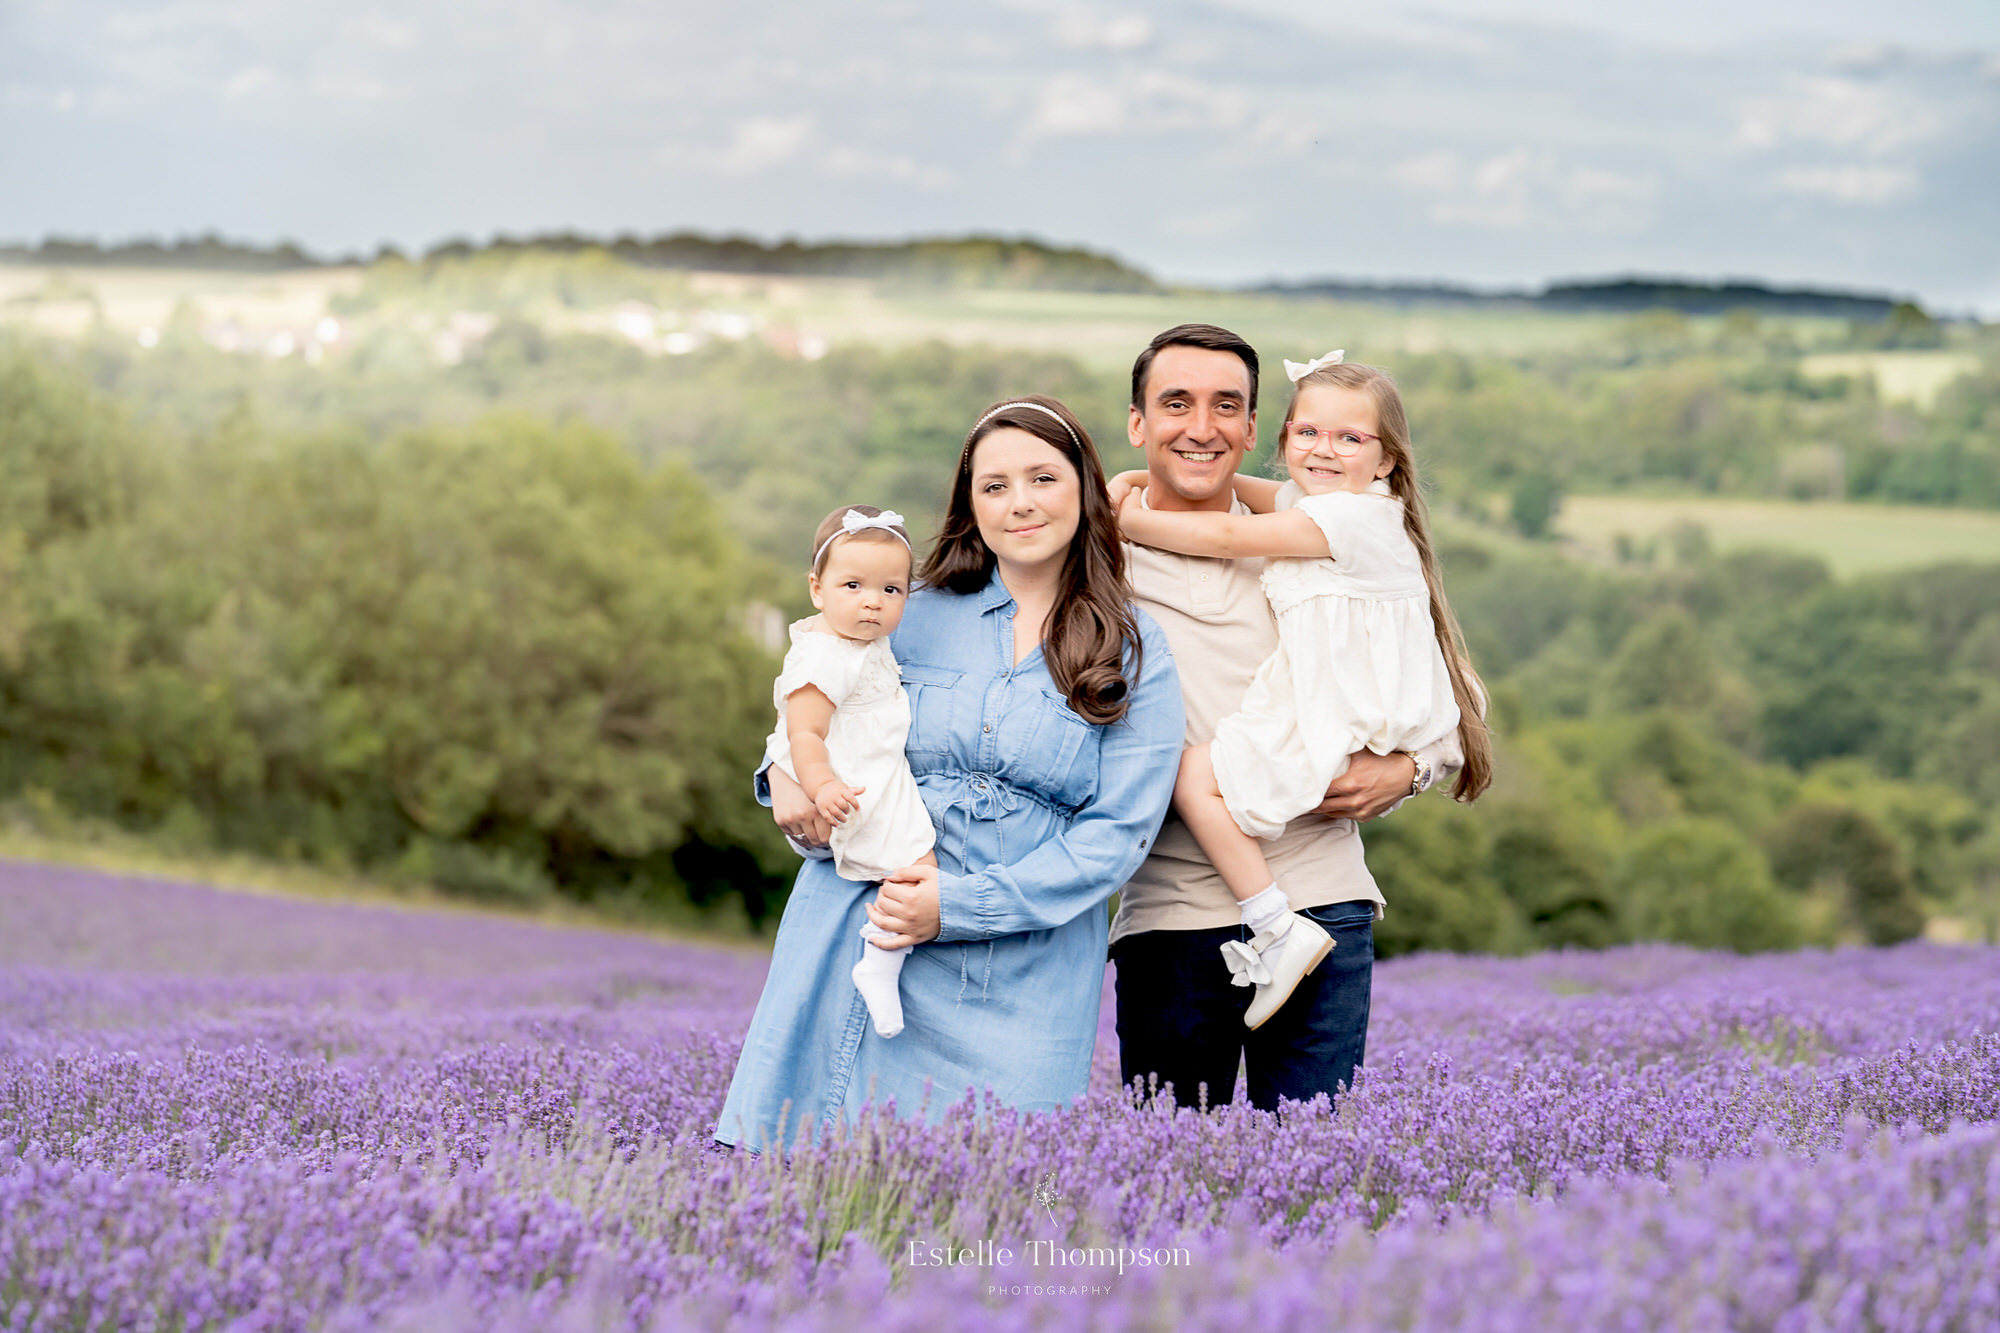 A mum a Dad and their two daughters stand in a lavender field in Sevenoaks for a family photoshoot